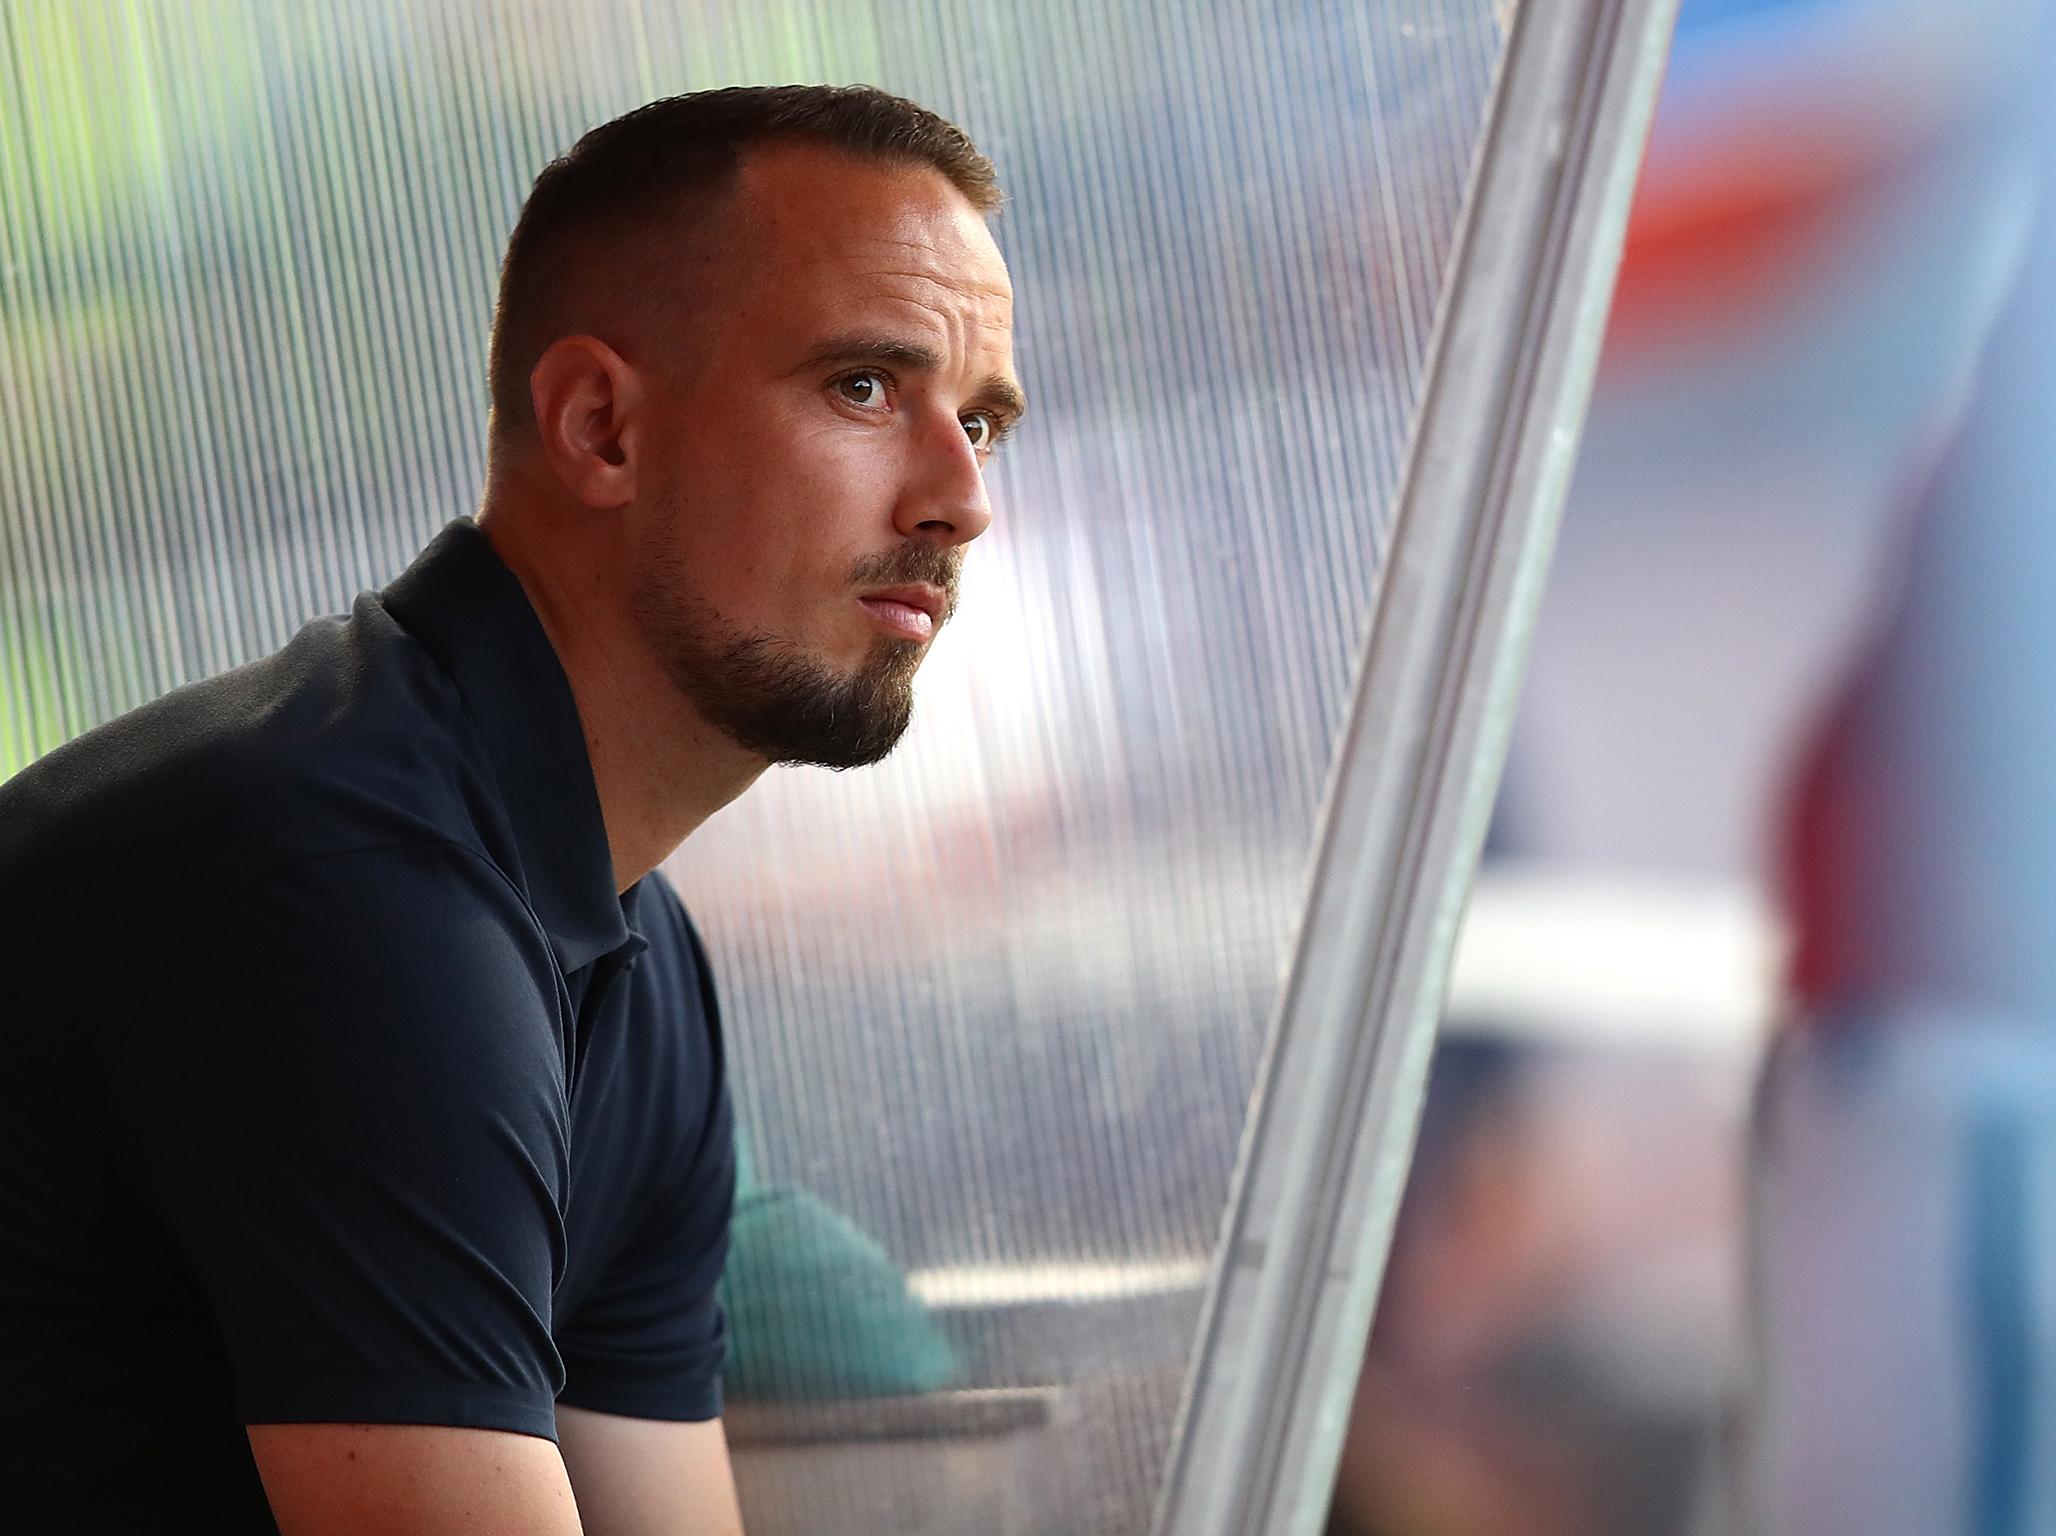 Mark Sampson was sacked by the FA after an 'inappropriate relationship' was revealed